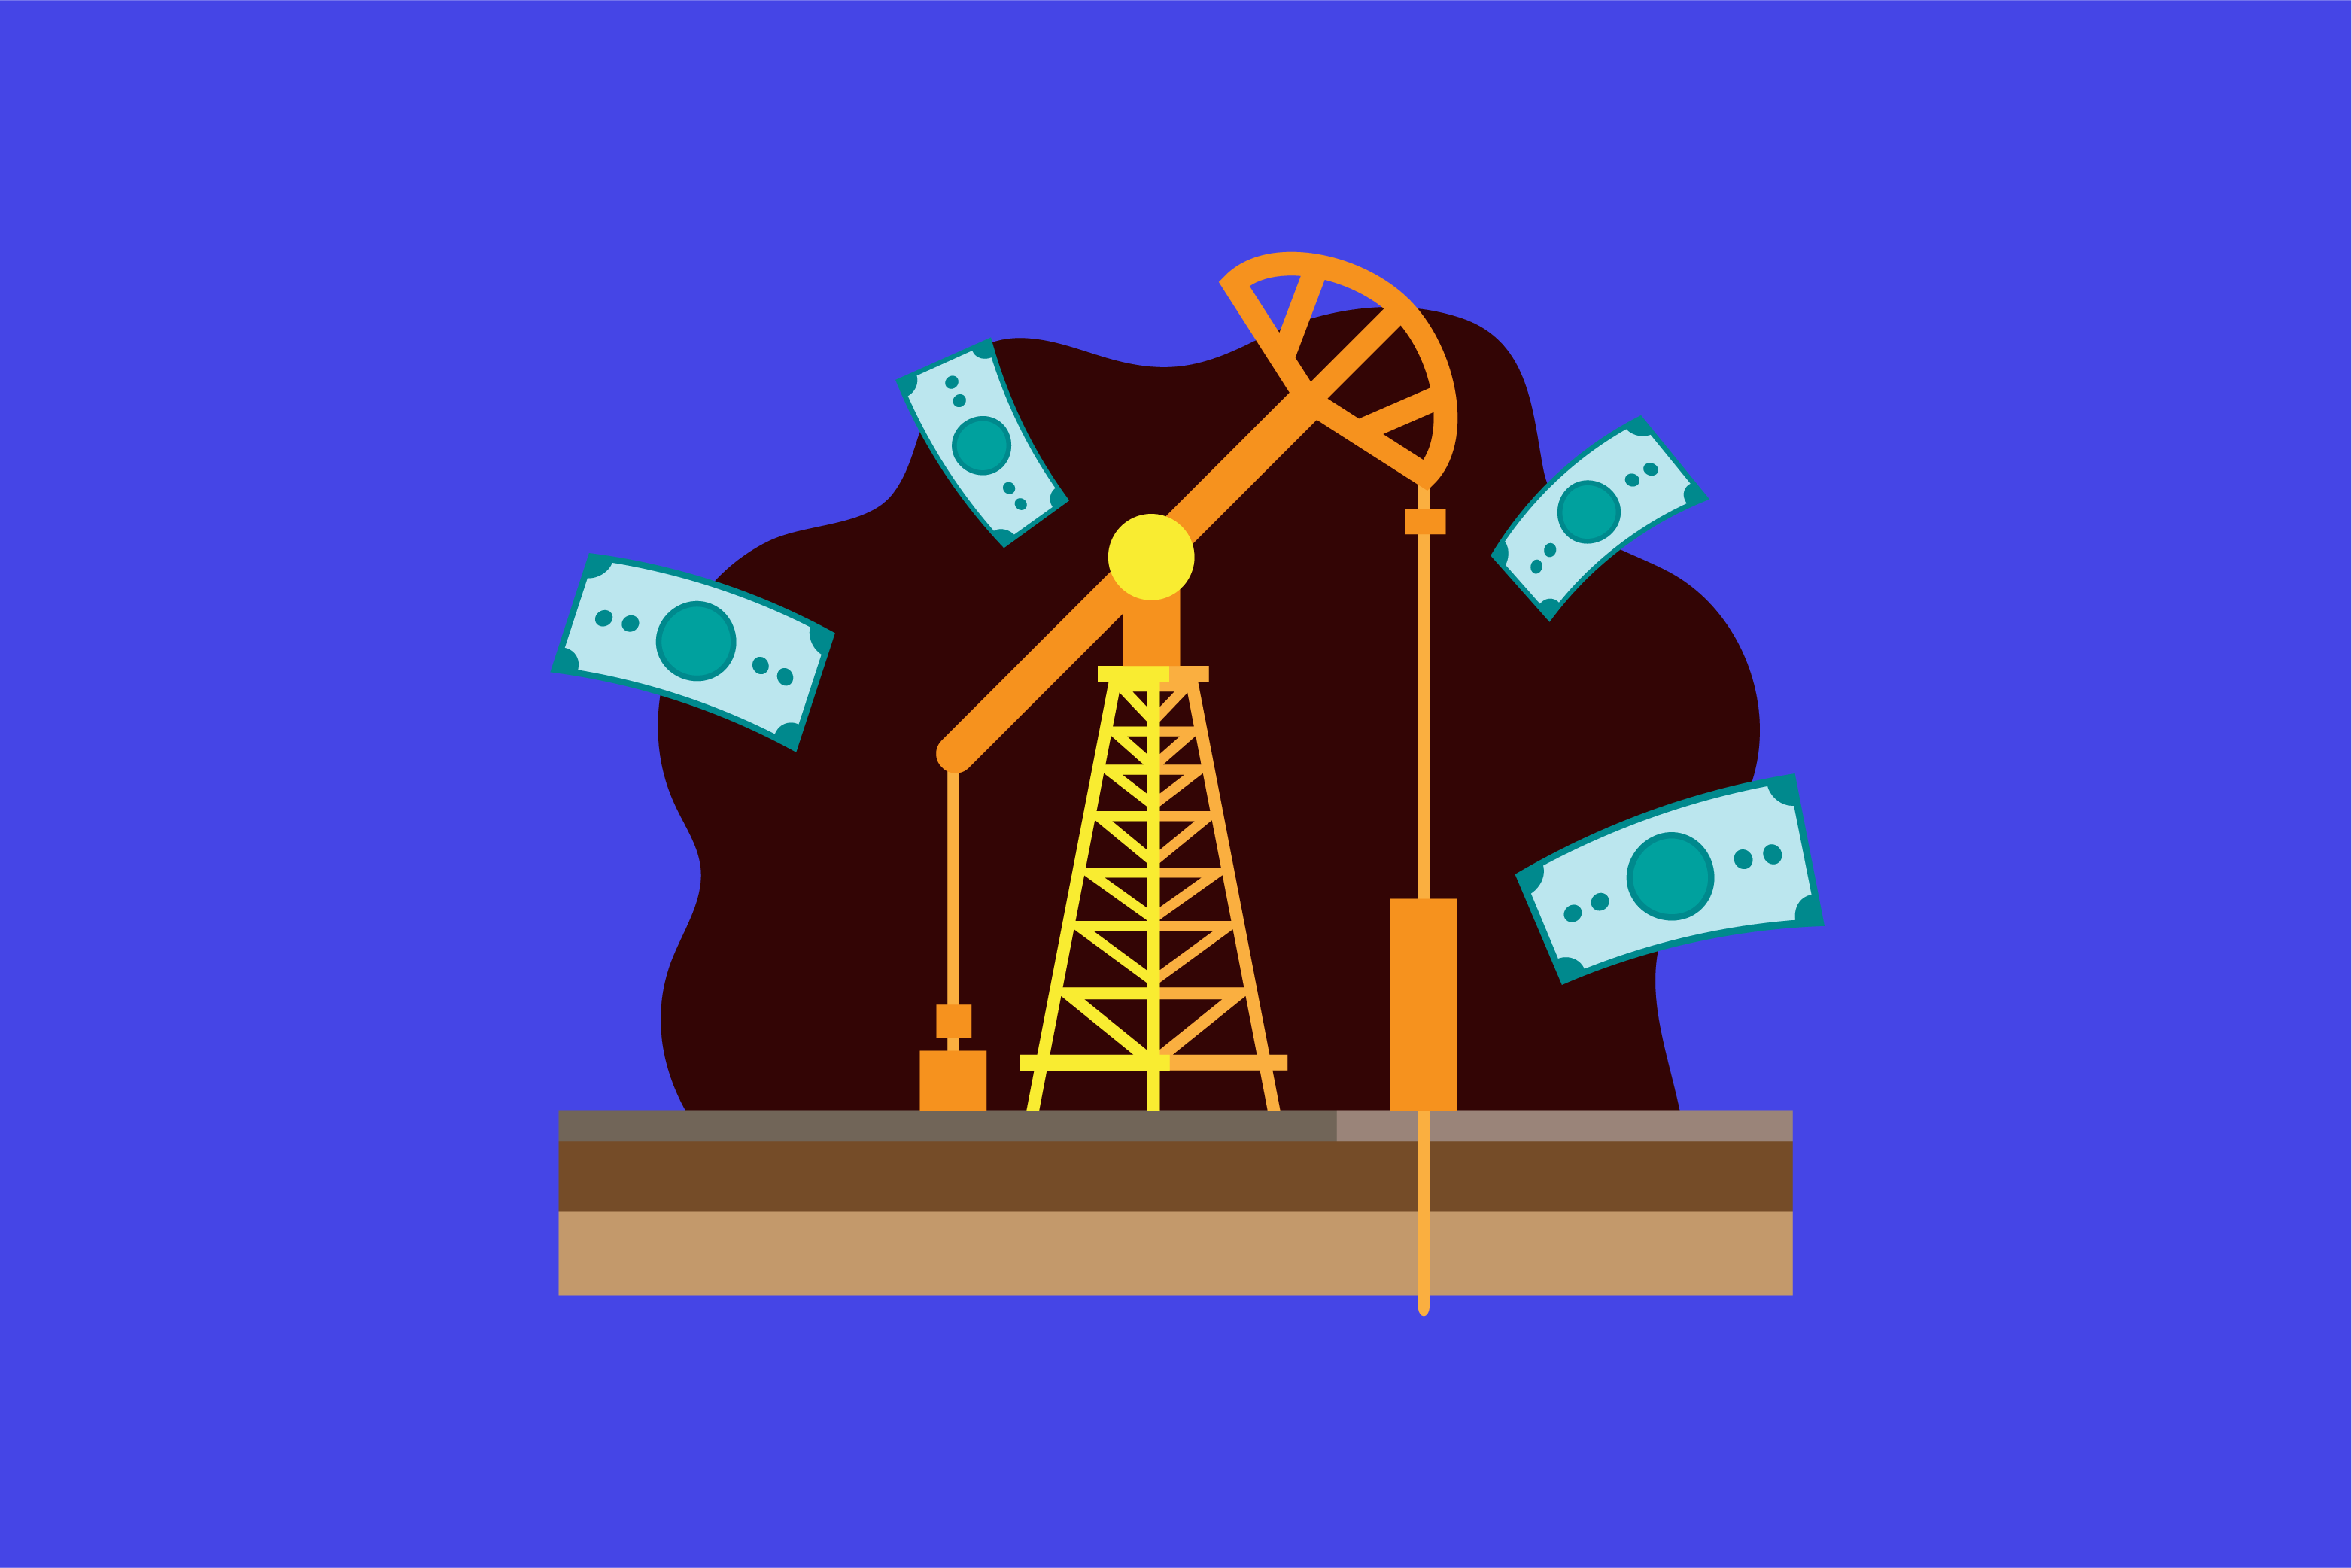 Minerals are now perceived as a core asset that can be considered for a portfolio for qualified investors seeking a right to proven oil and gas reserves.